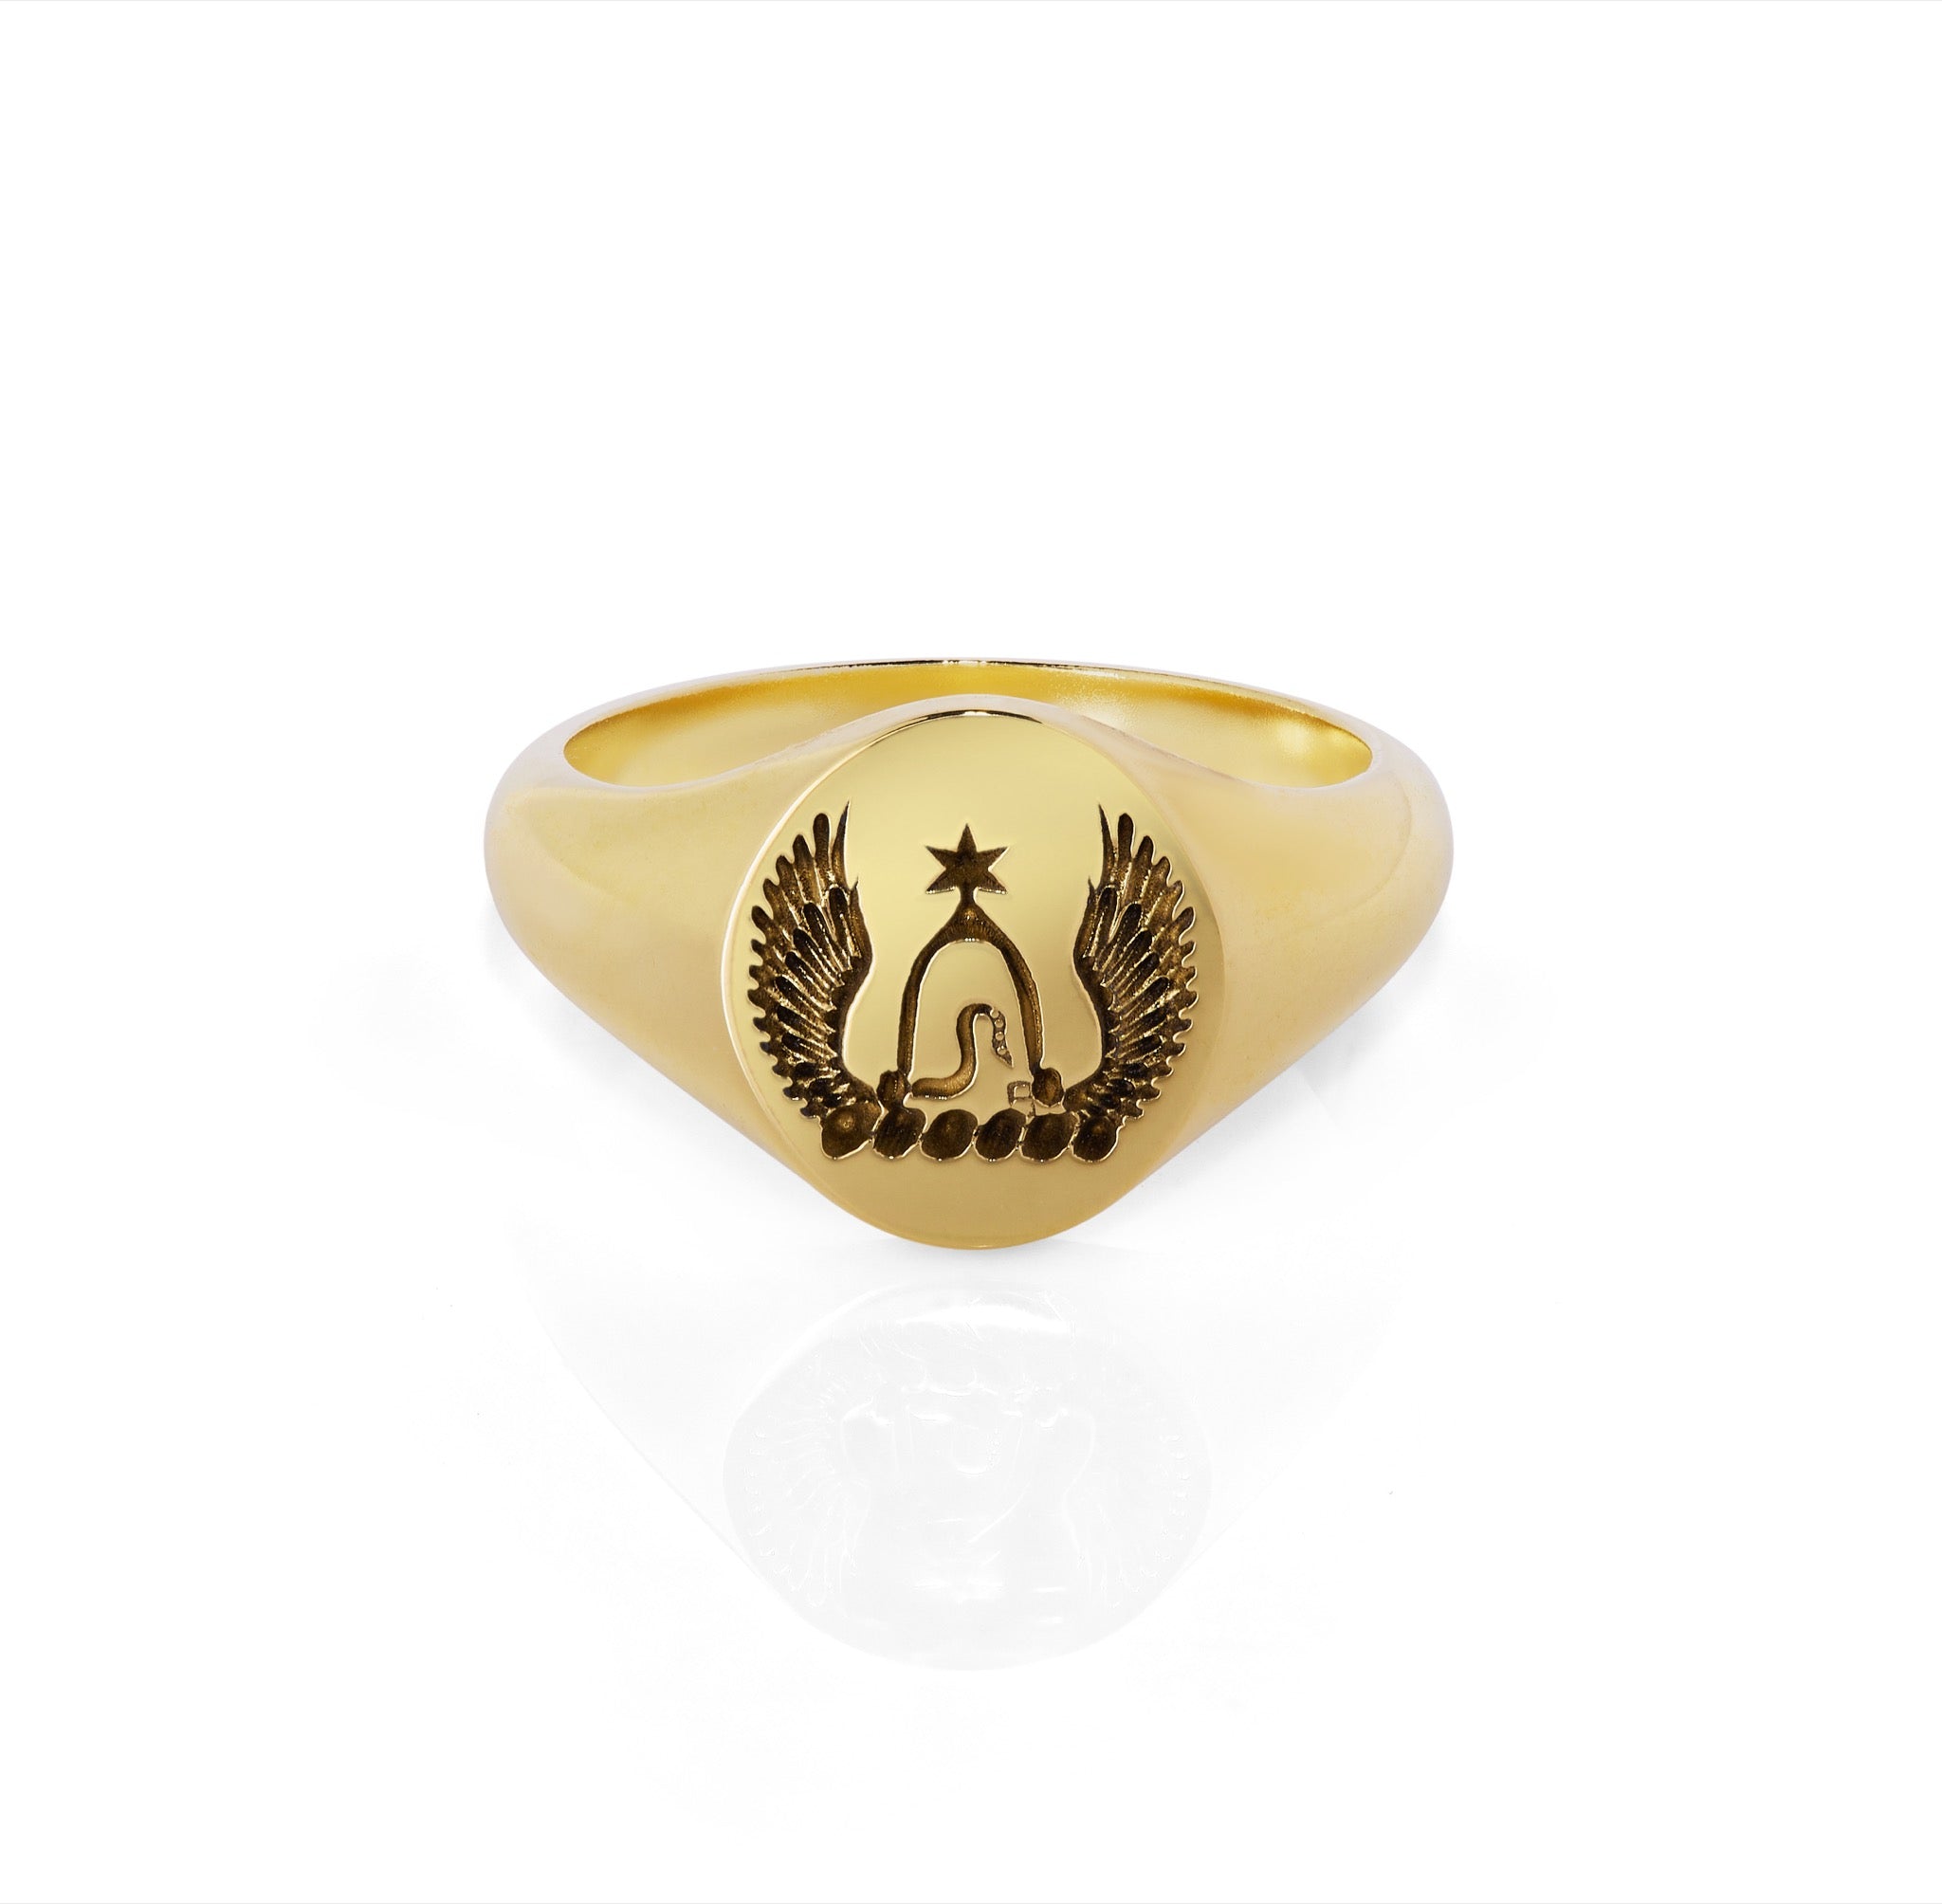 Bespoke handmade signet ring, engraved with family crest, made from  our client's recycled yellow gold 